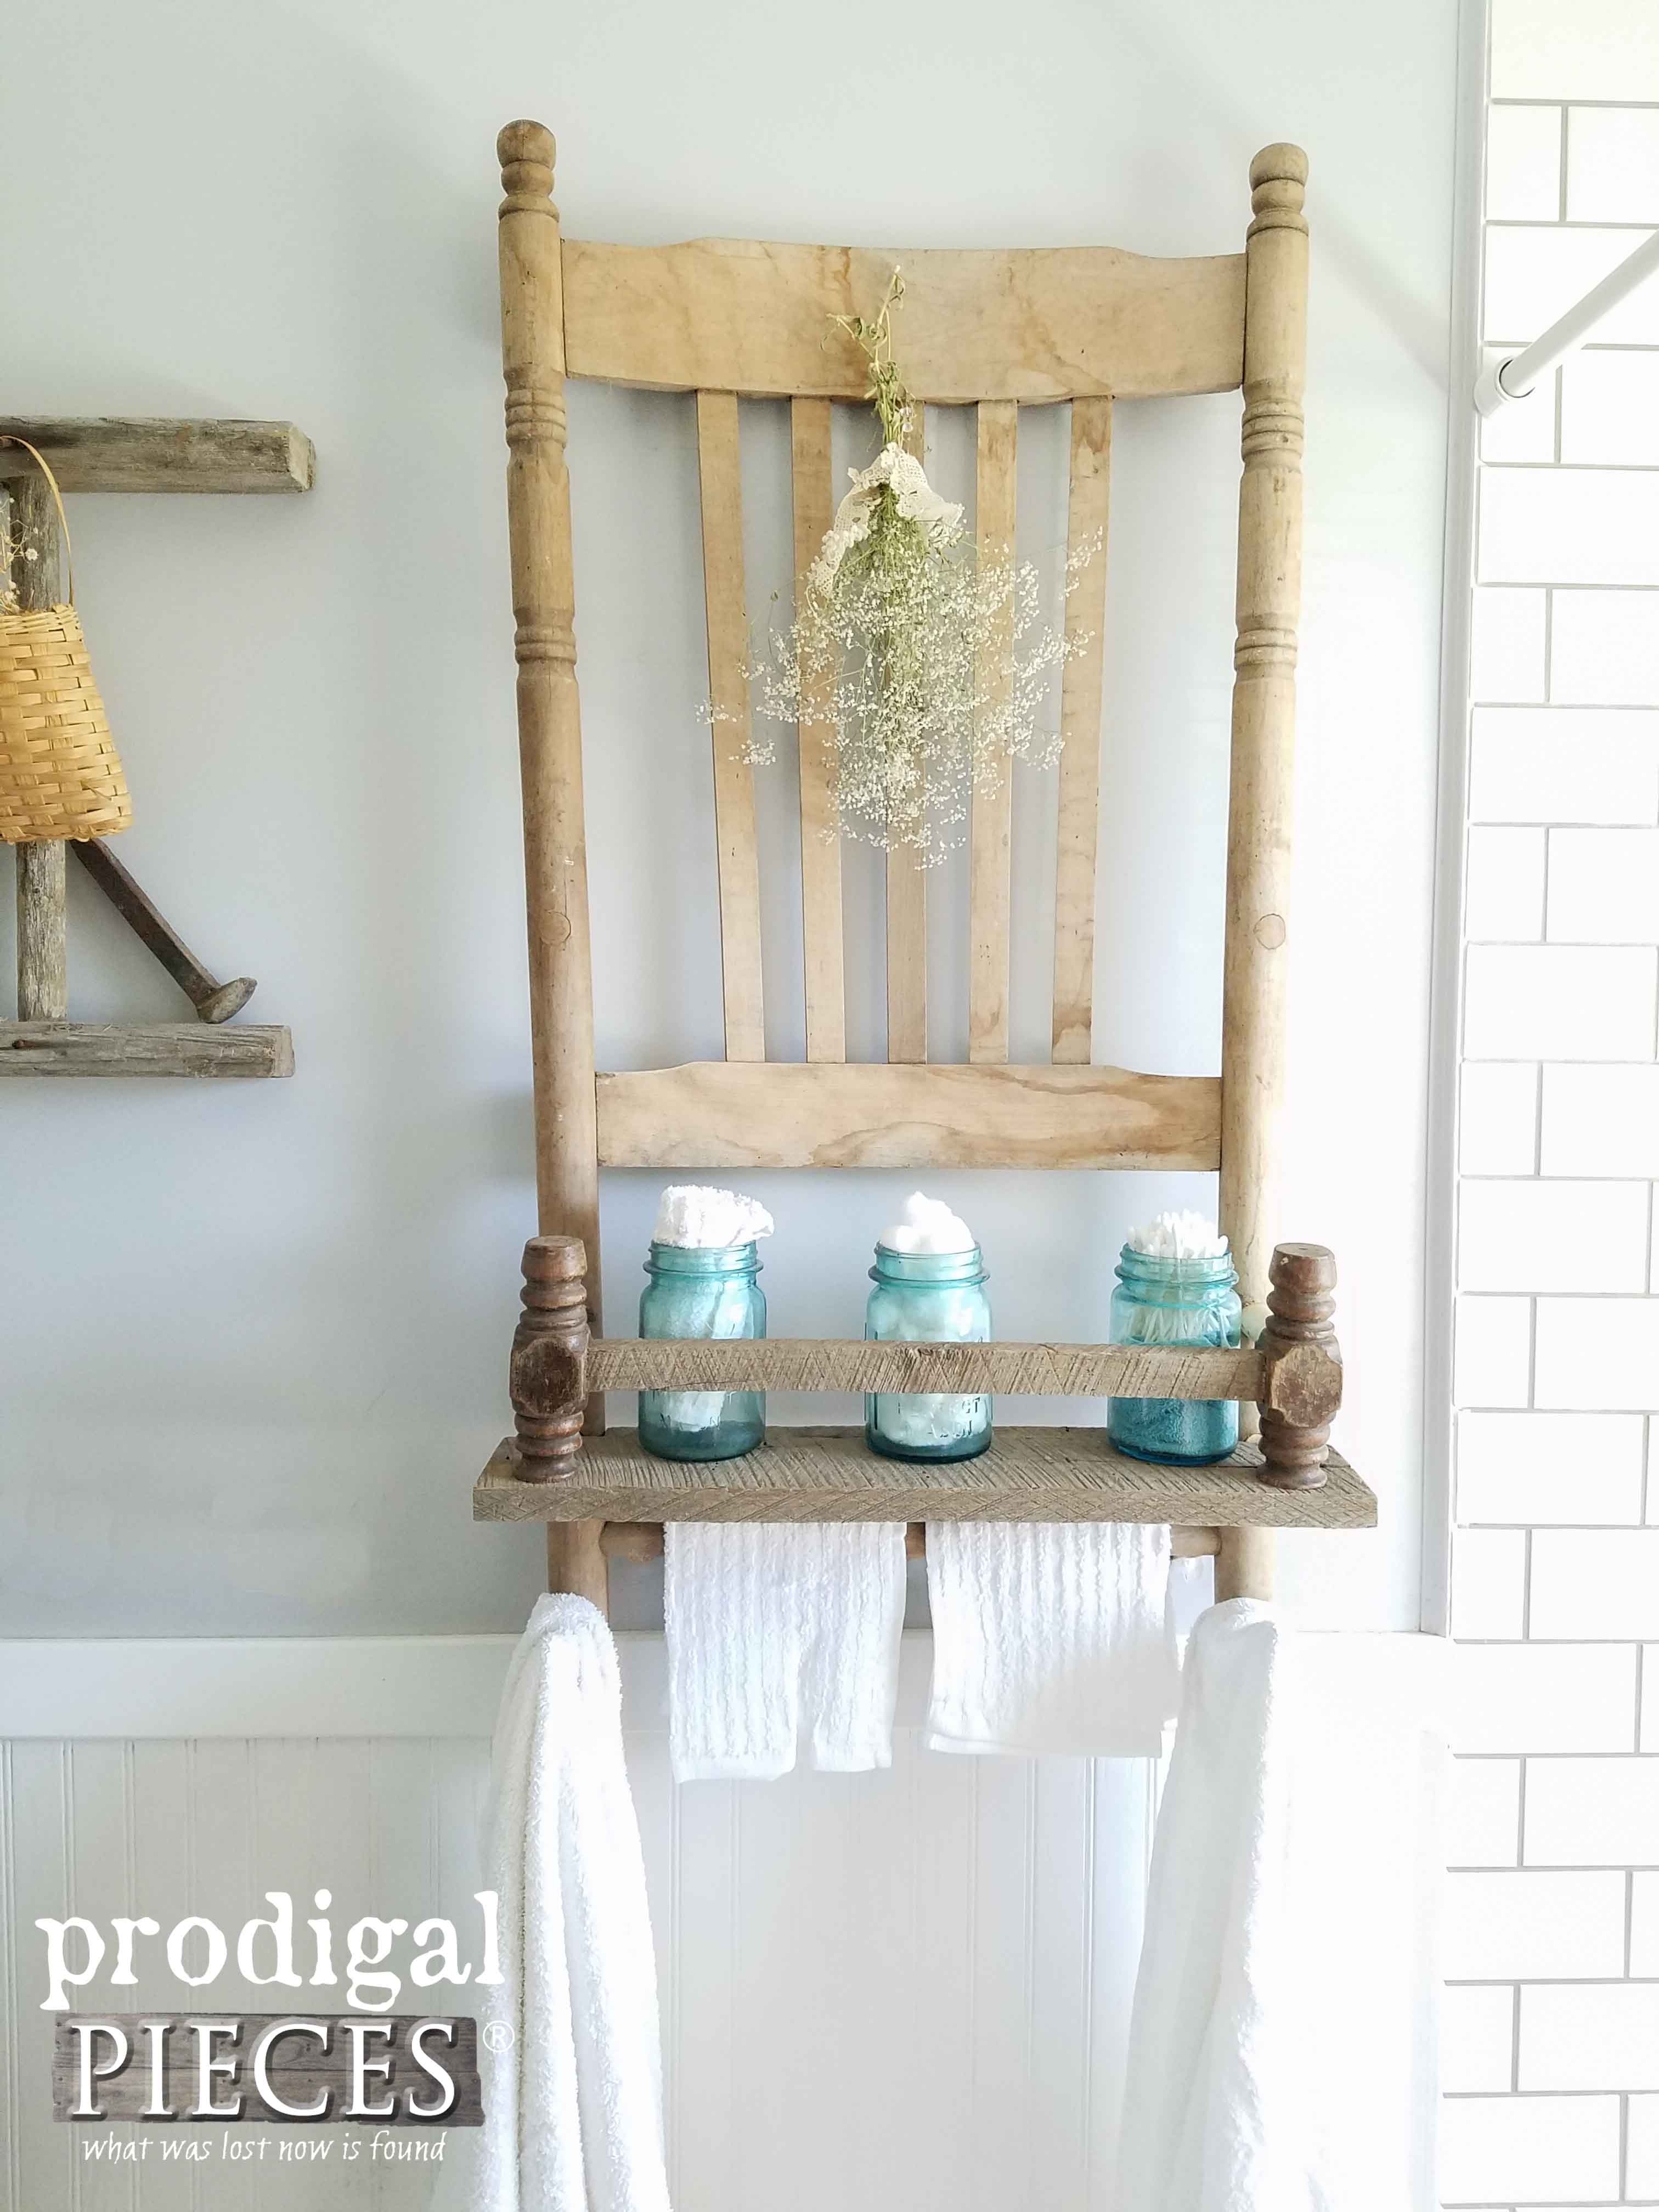 Broken Chair Repurposed into Reclaimed Shelf by Prodigal Pieces | www.prodigalpieces.com